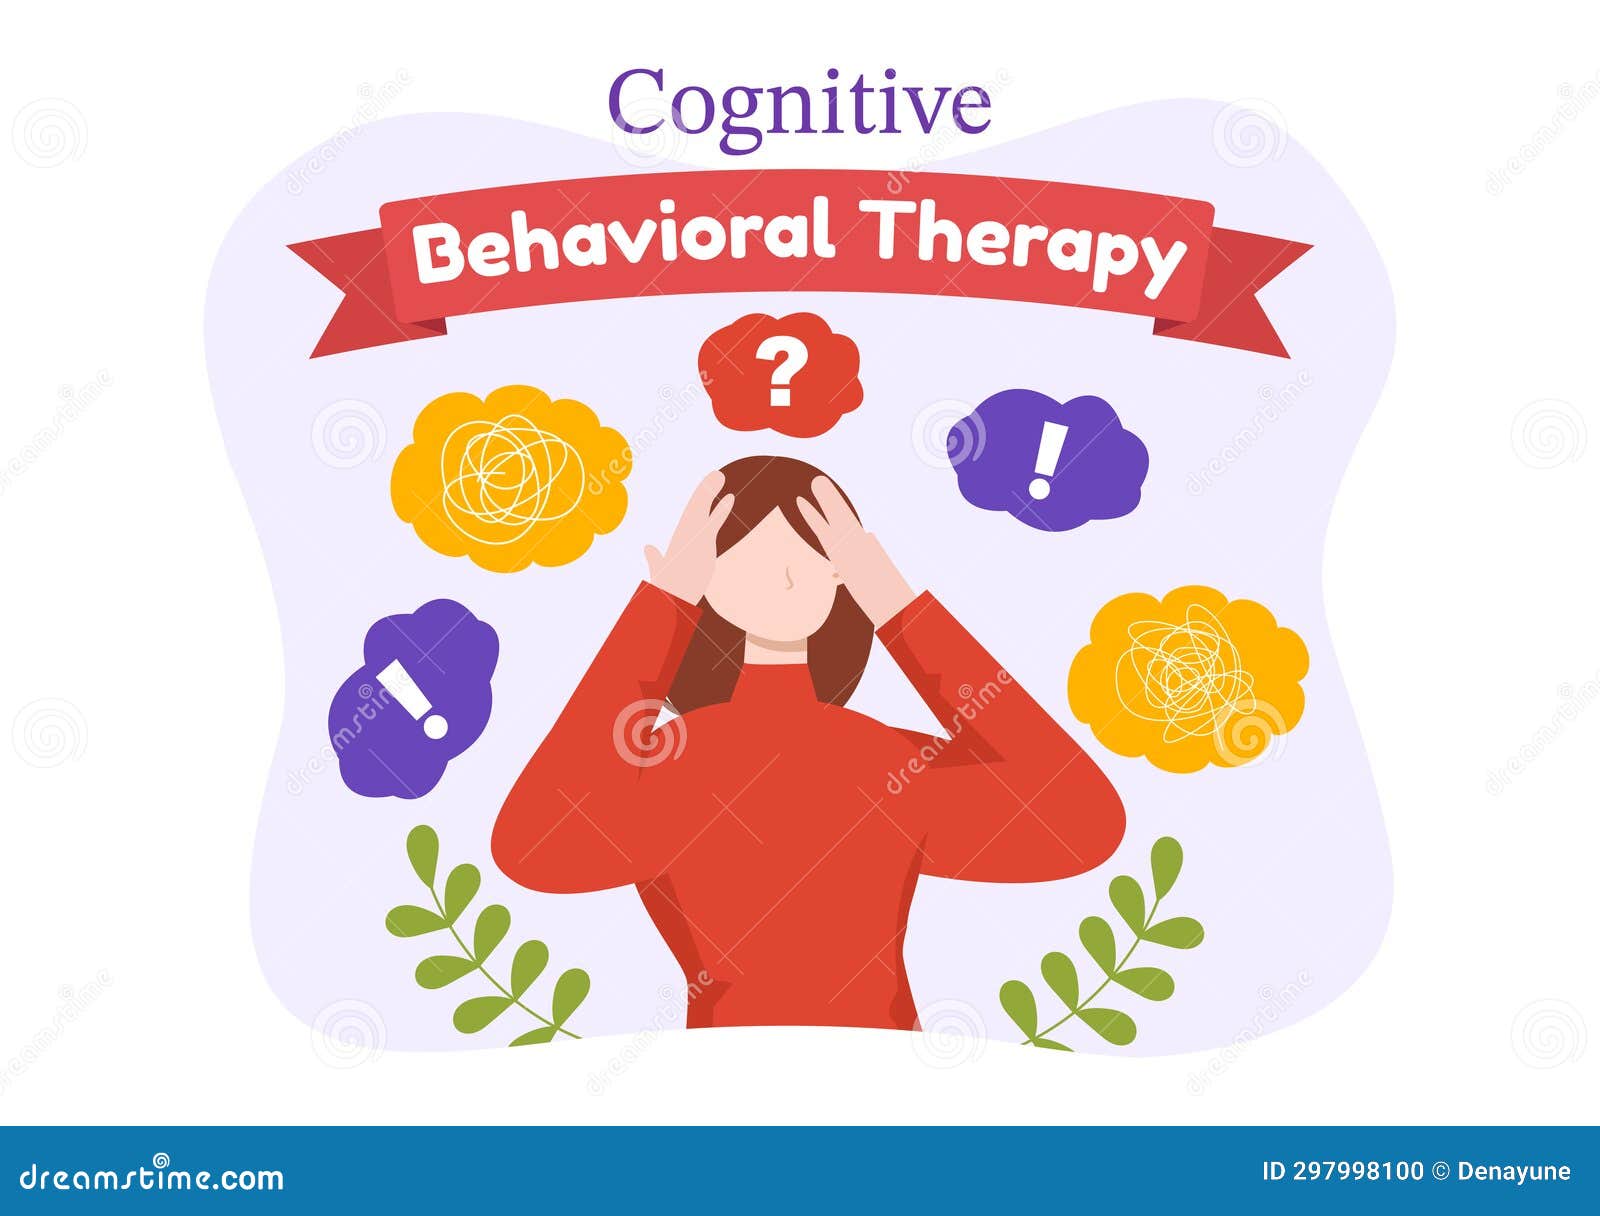 cbt or cognitive behavioural therapy   with person manage their problems emotions, depression or mindset